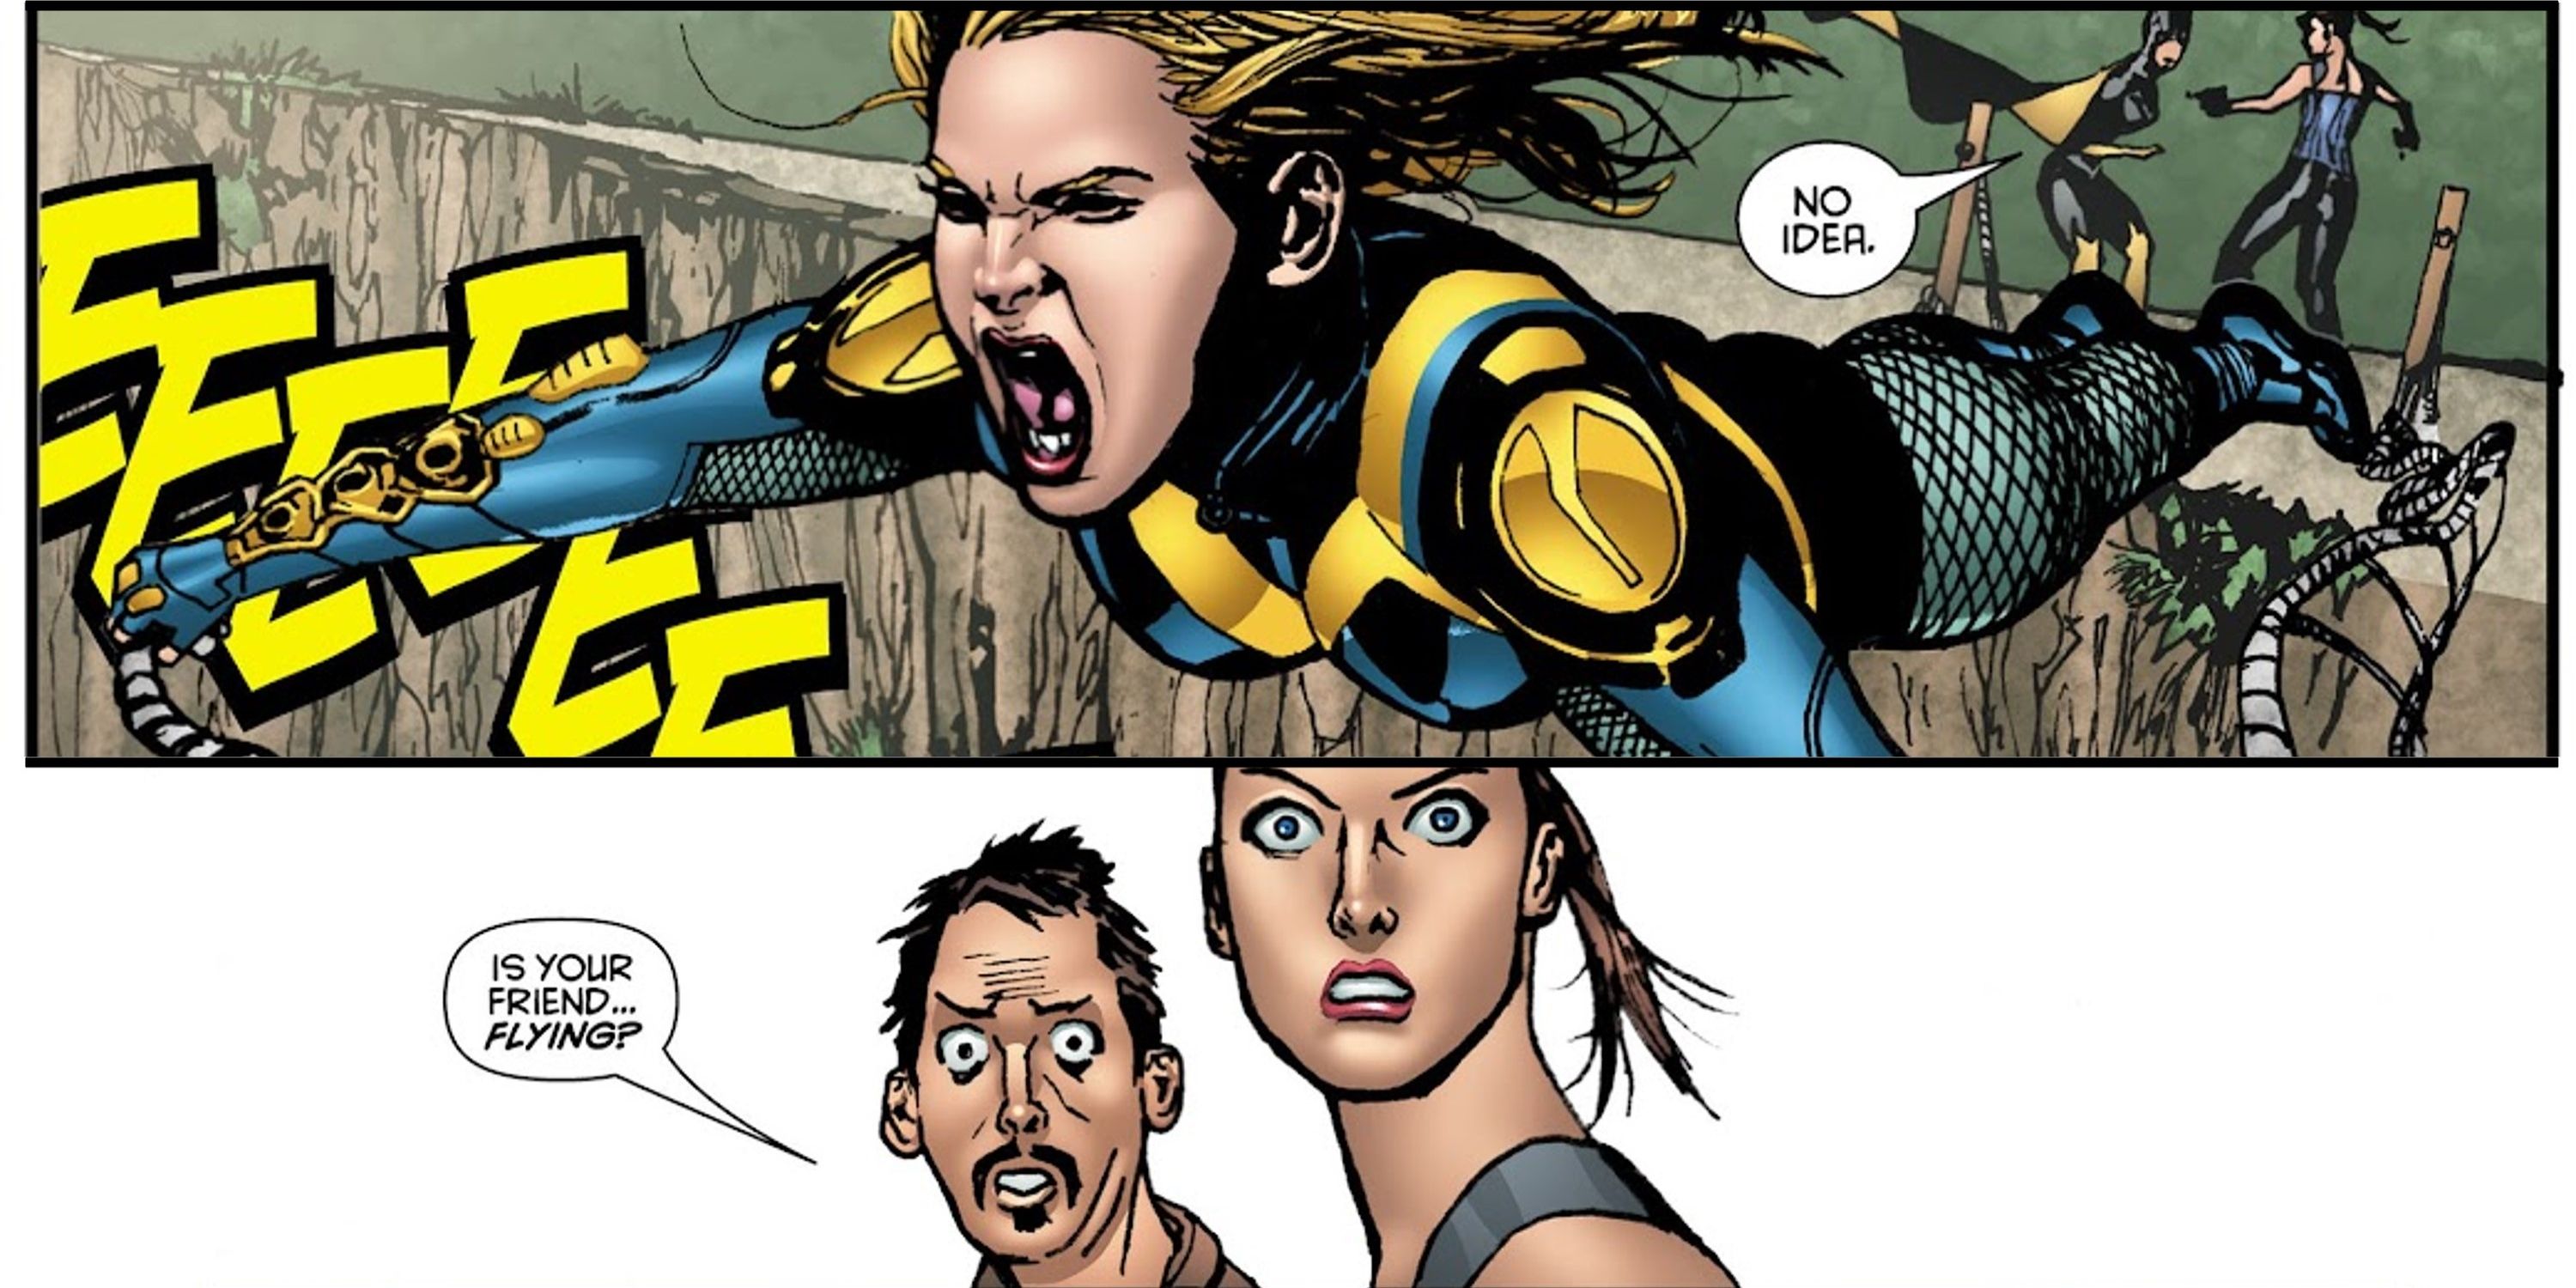 Black Canary uses her supersonic cry to "fly" in Birds of Prey, DC Comics